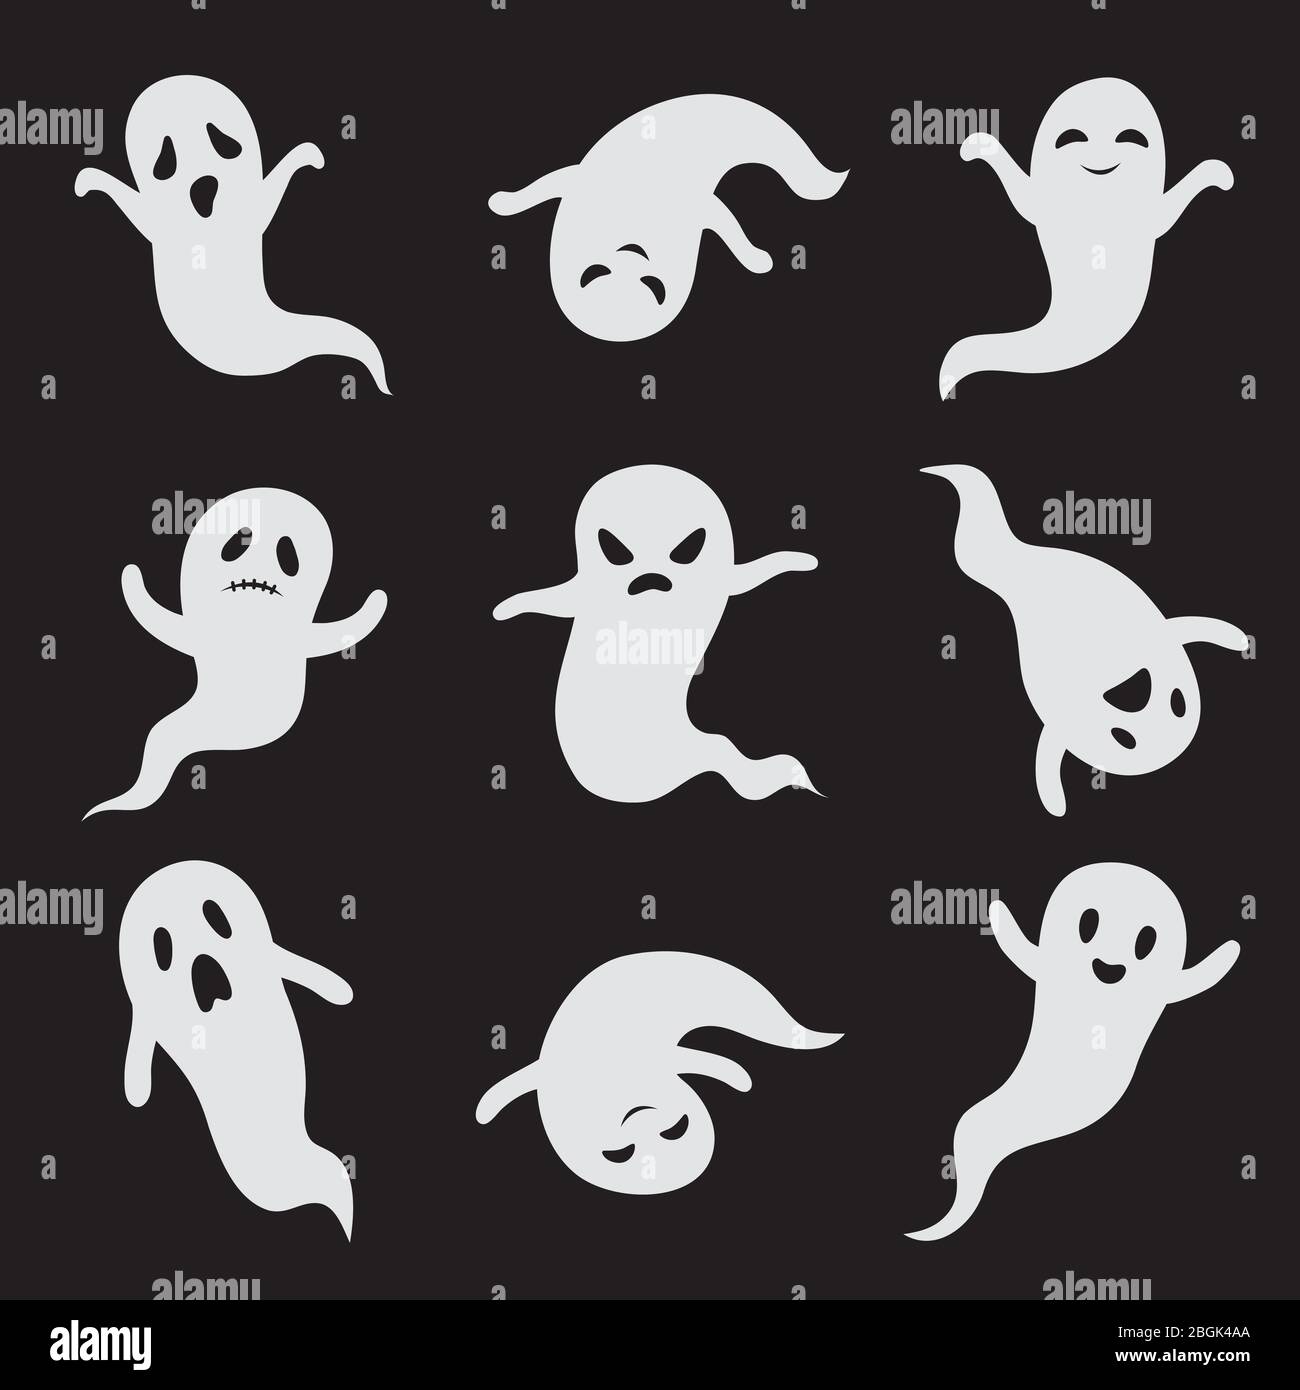 Ghost. Halloween ghostly faces. Spooky monster vector isolated icons. Ghost white face, spooky and scary illustration Stock Vector